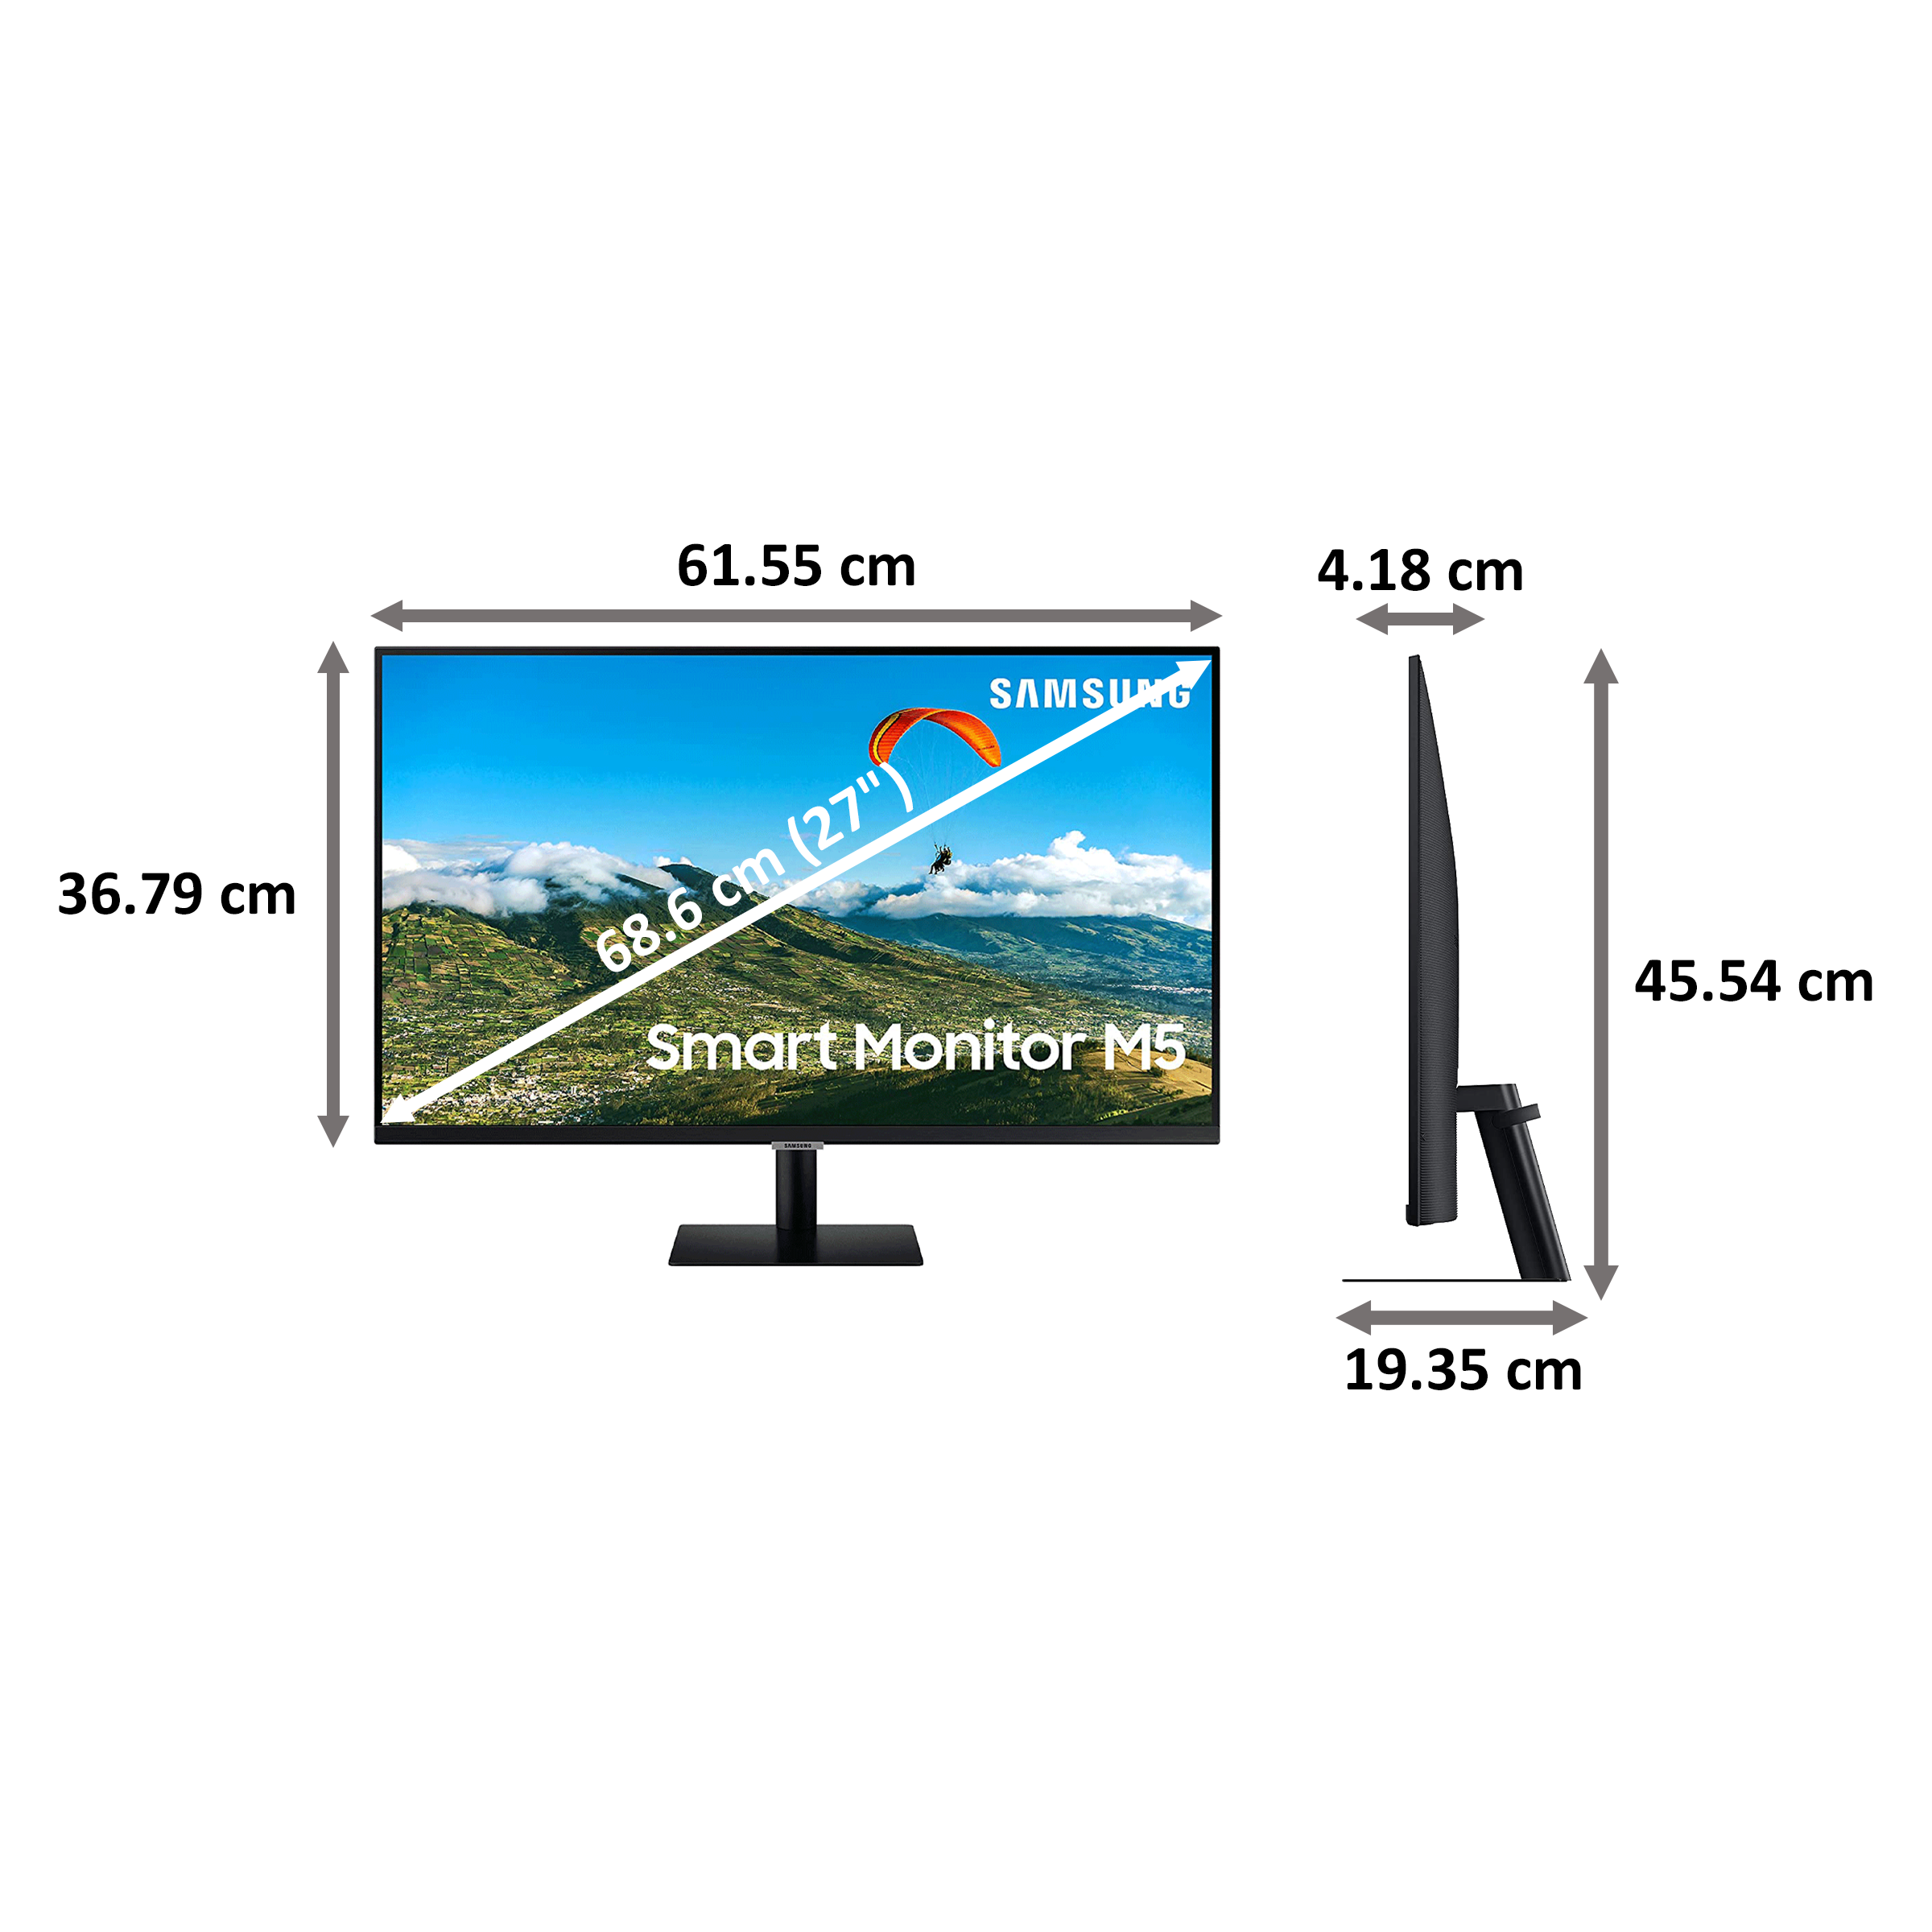 Samsung M5 68.6cm (27 Inches) Full HD LED Backlit Monitor (Adaptive Picture Technology, Screen Mirroring + DLNA, 60 Hz, LS27AM500NWXXL, Black)_2